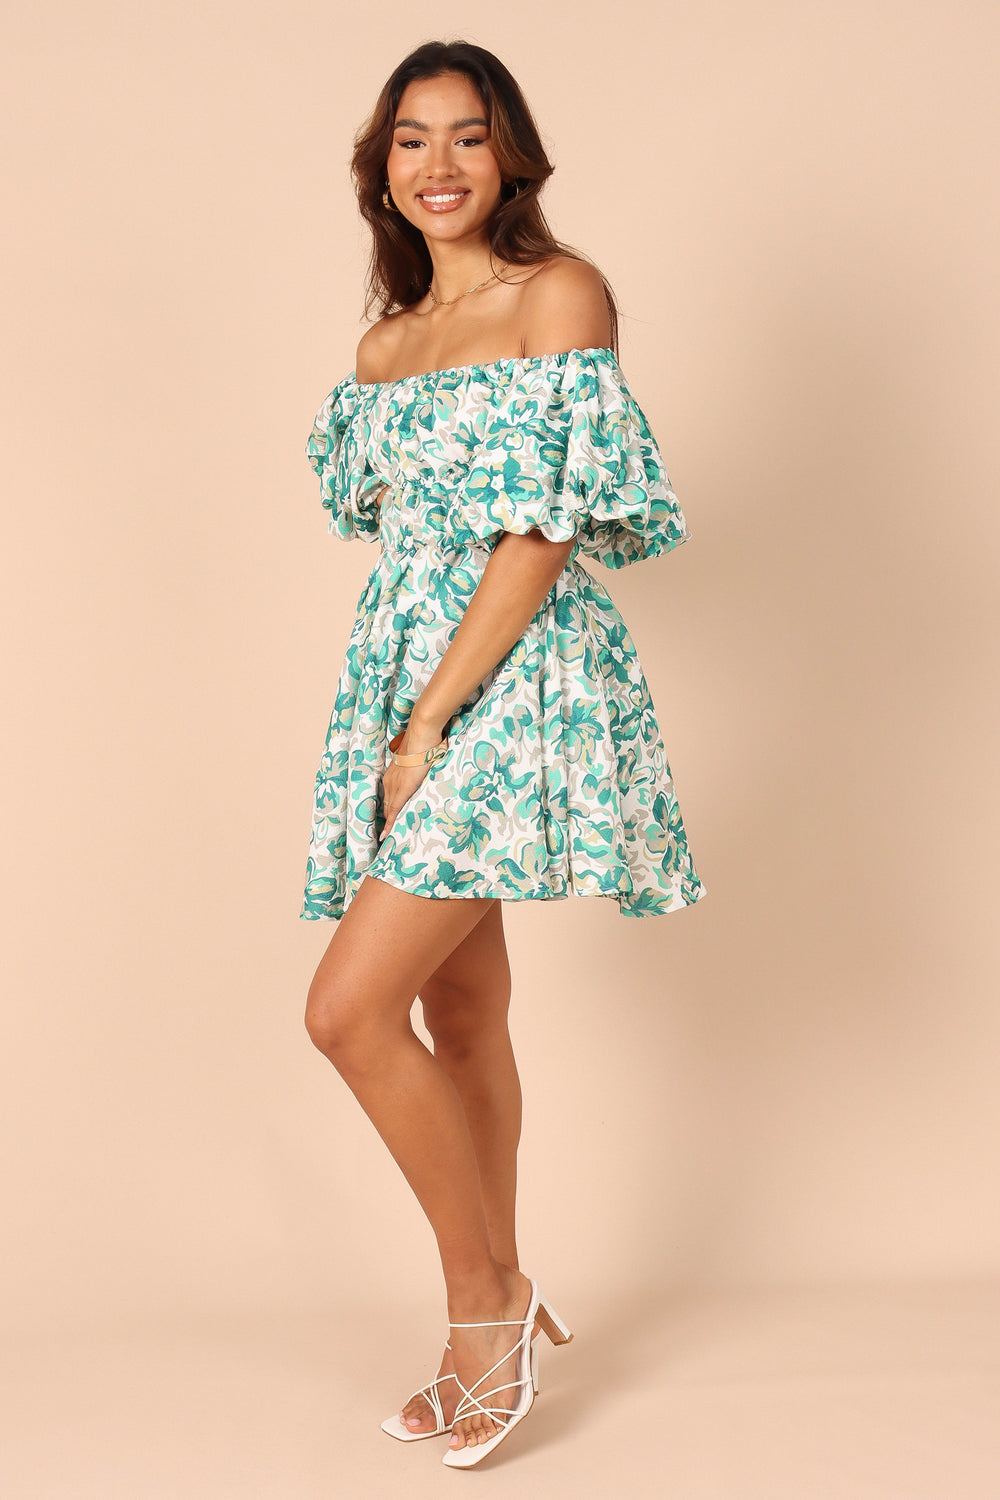 Petal and Pup USA DRESSES Shelly Dress - Blue Floral